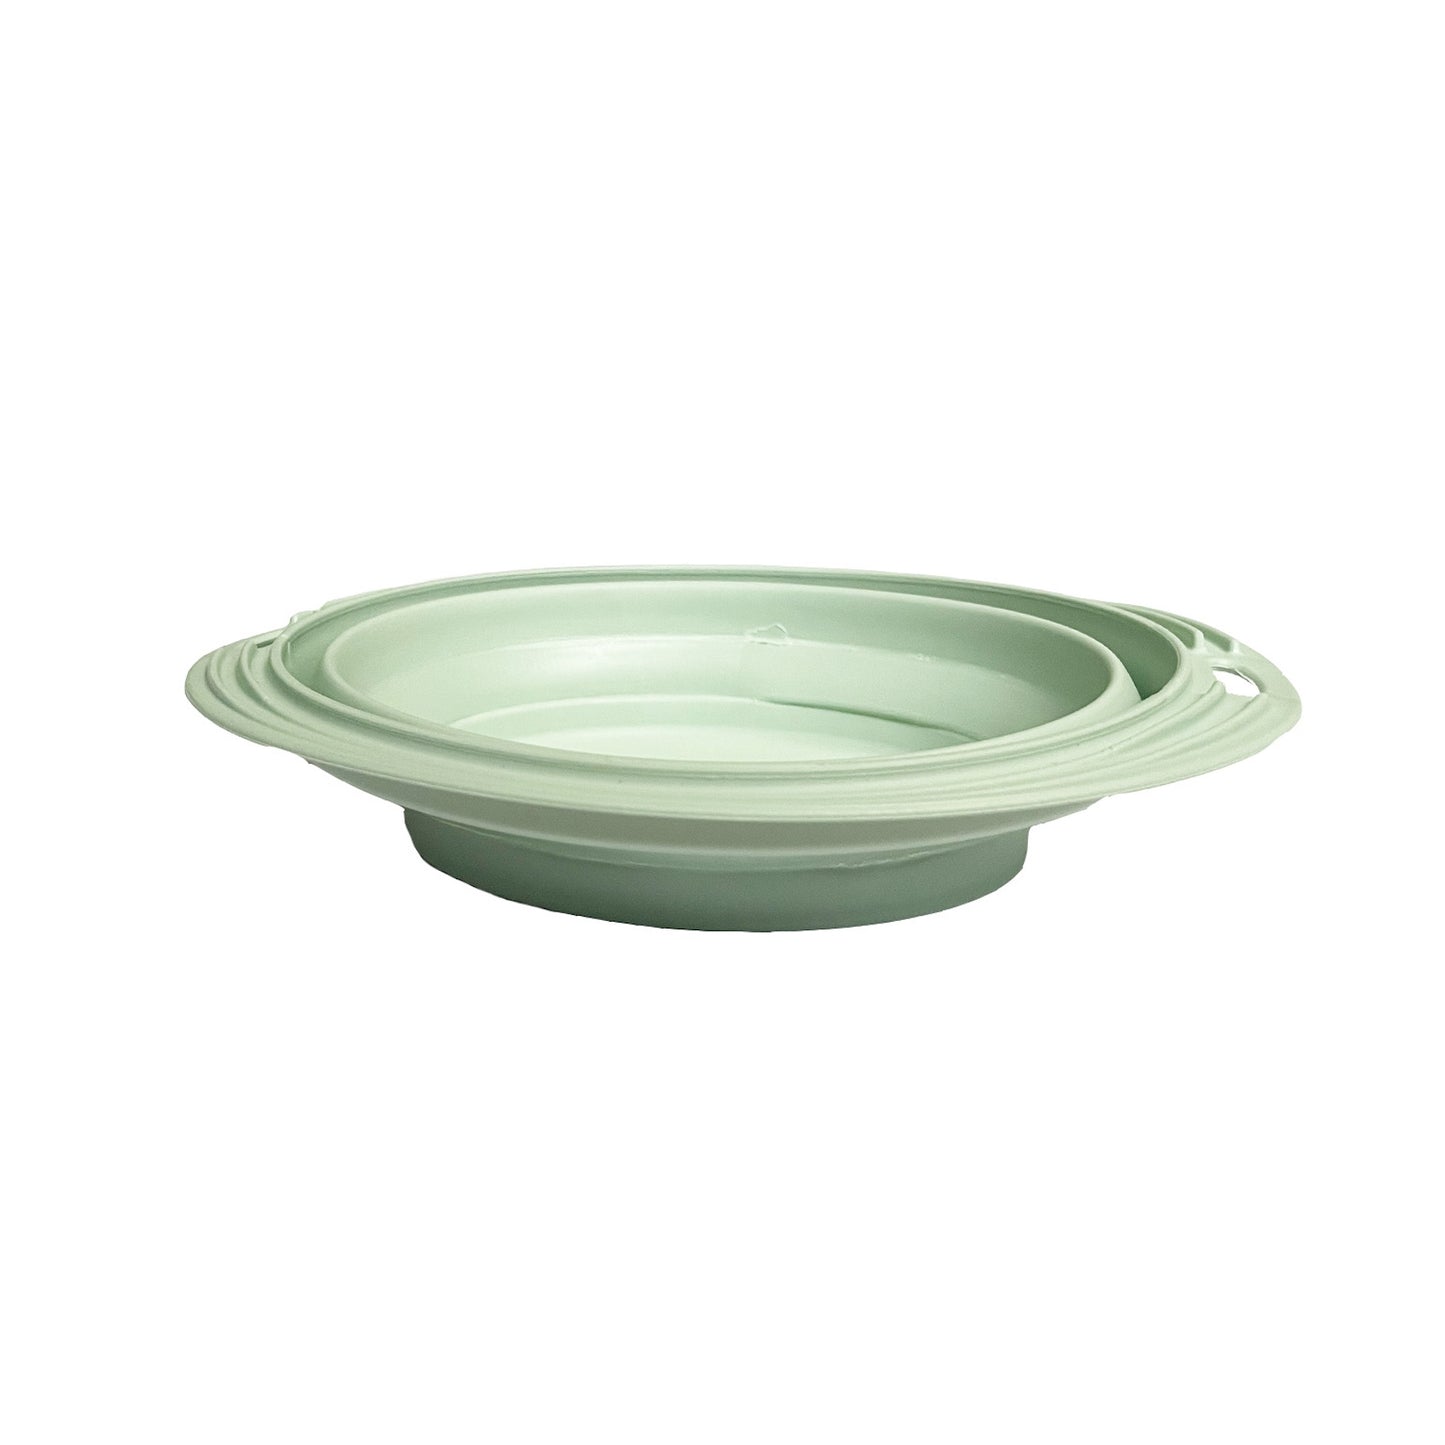 Collapsable Oval Travel Pet Bowl Sage